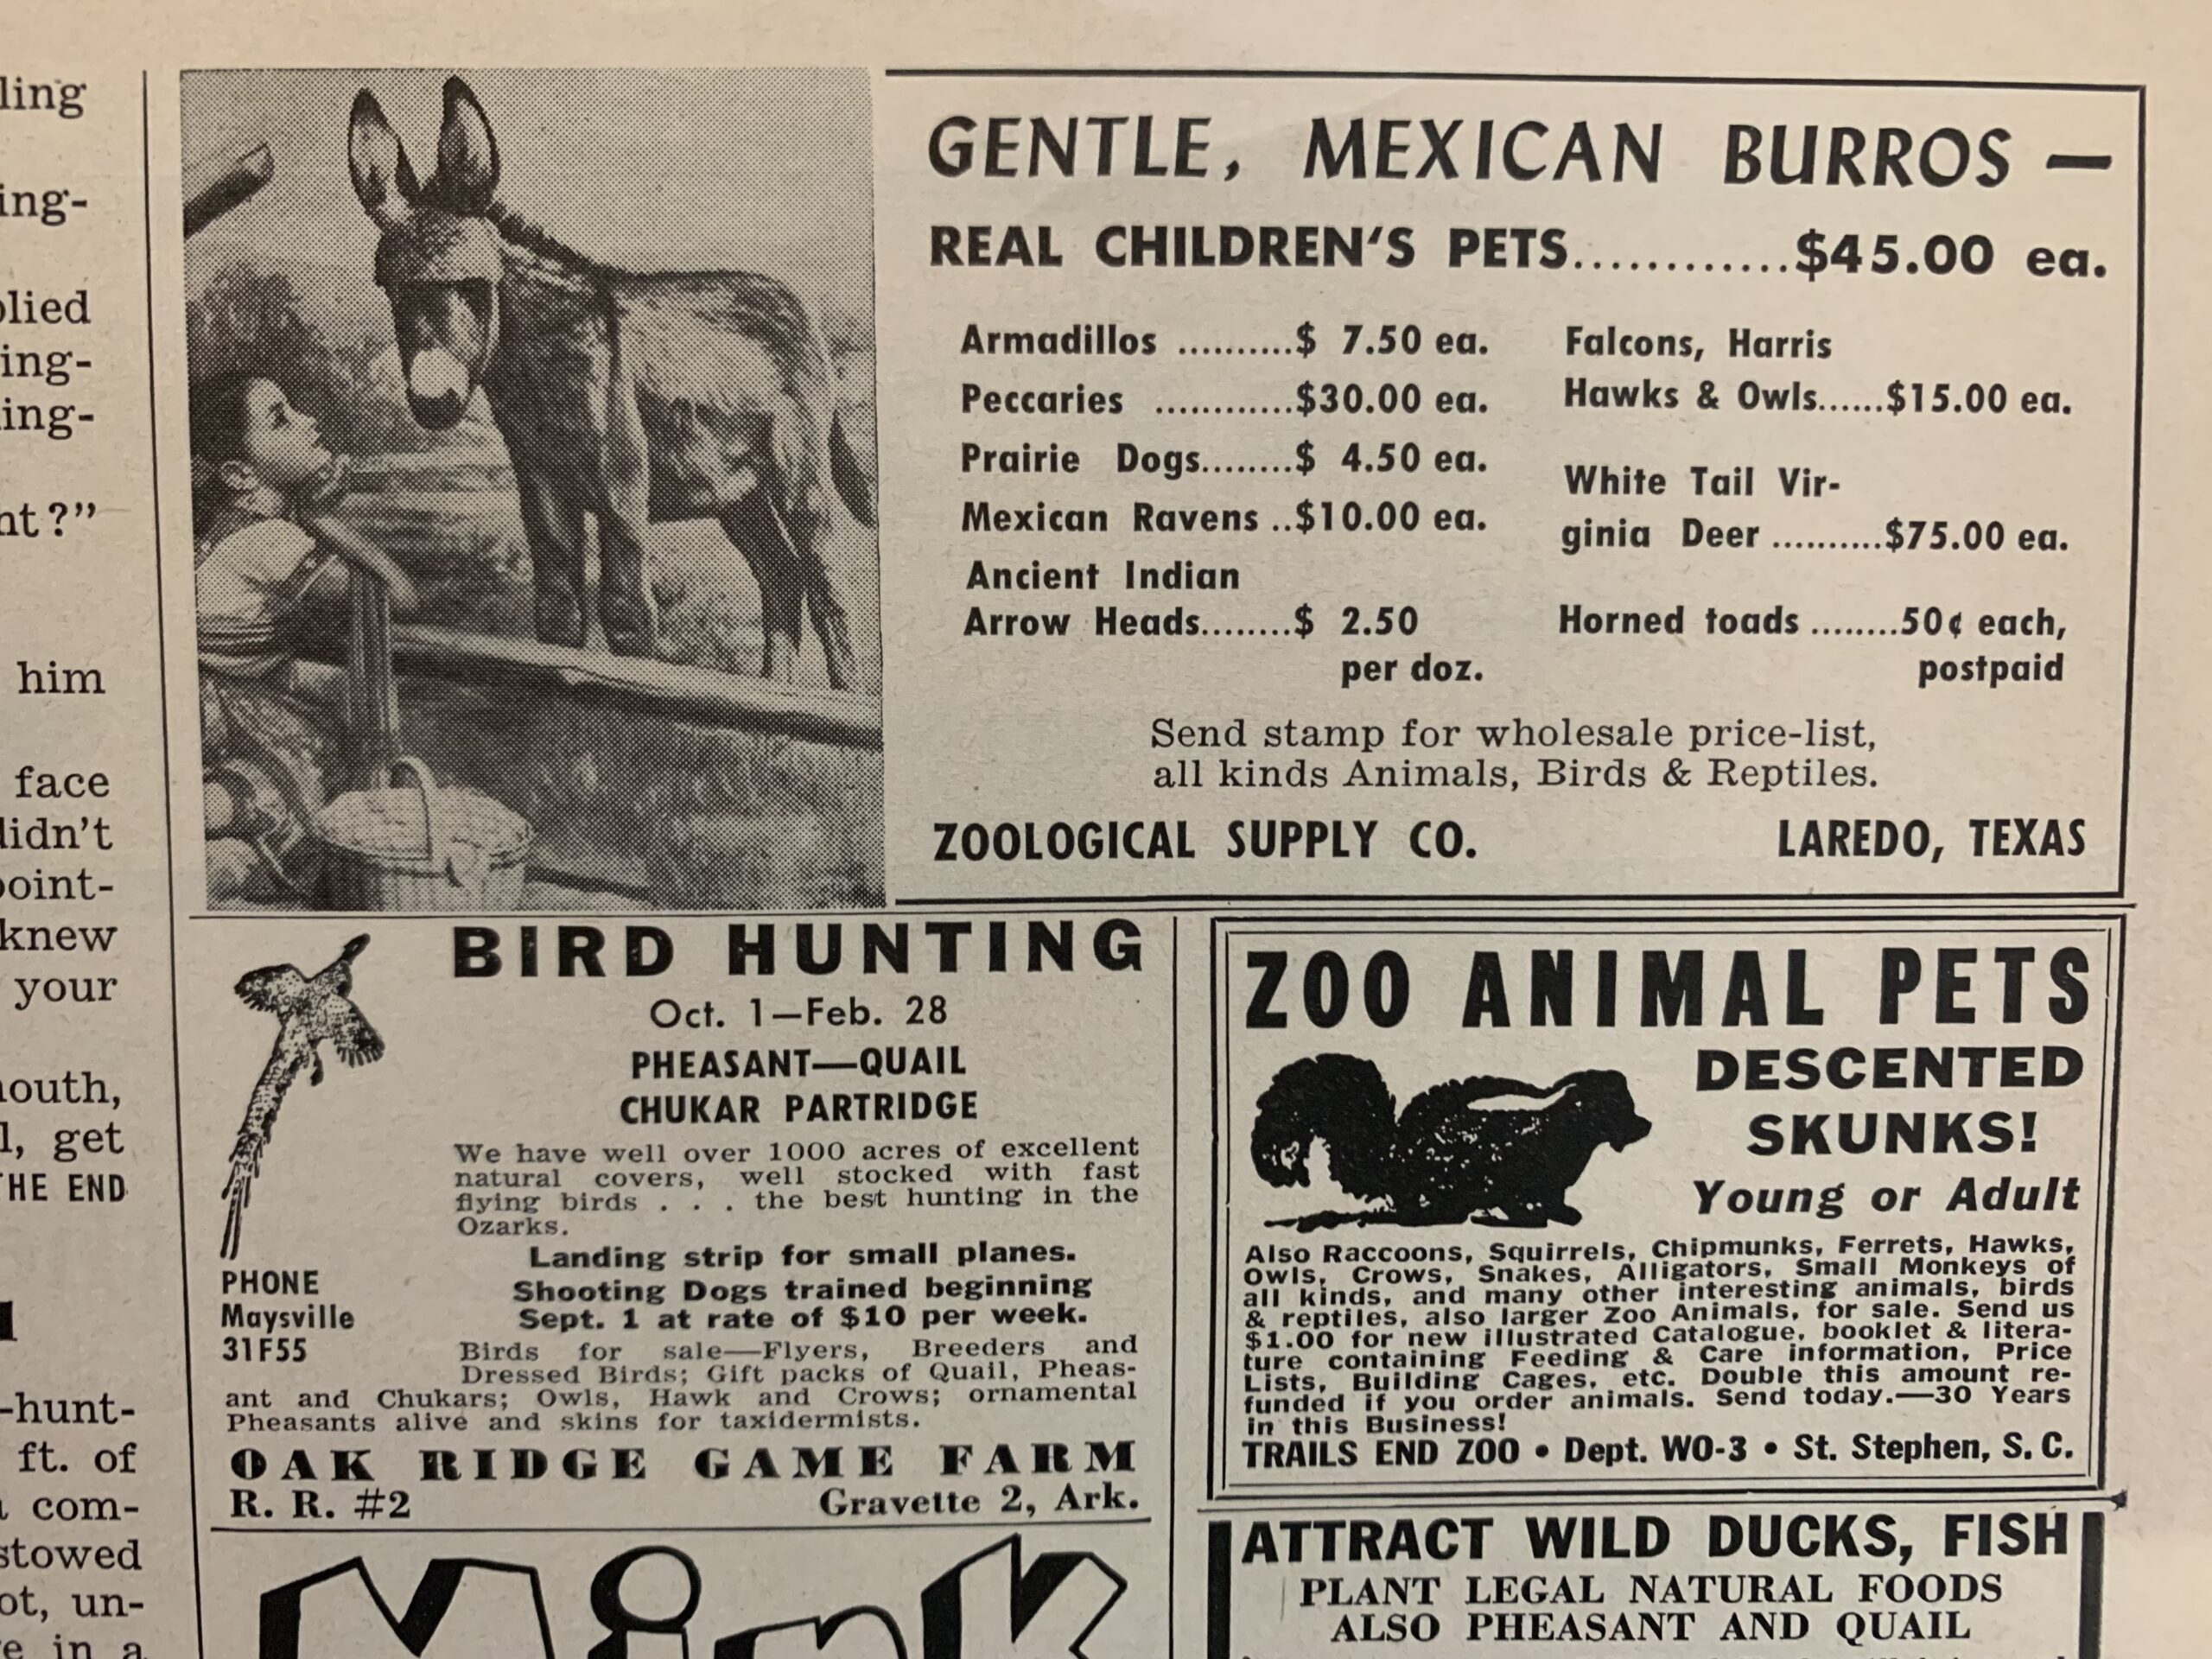 Live animals advertised in Outdoor Life